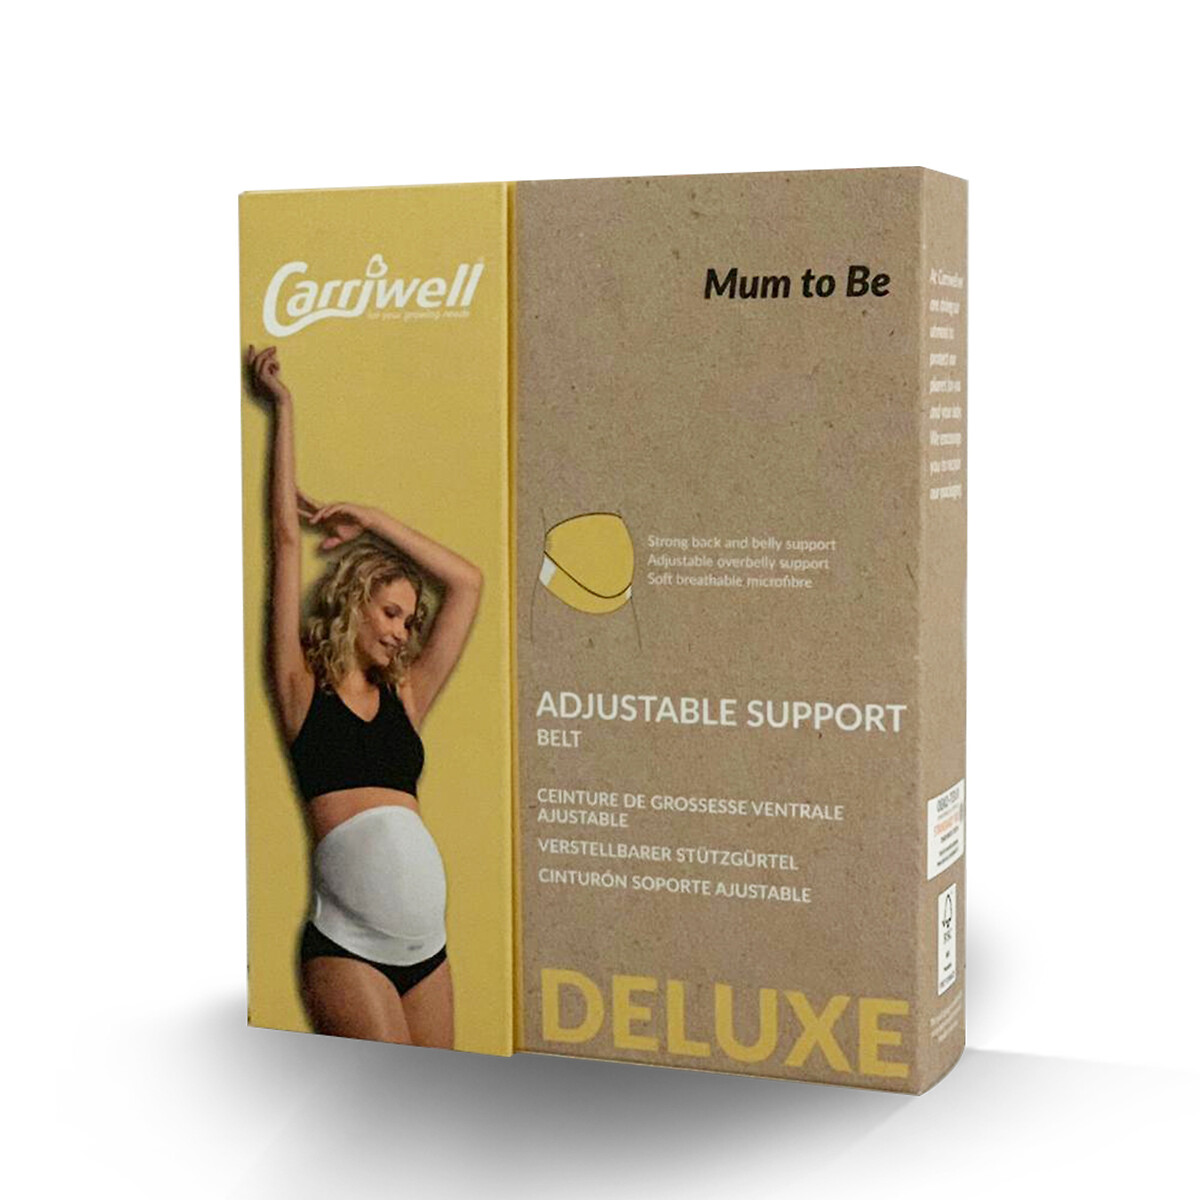 Maternity Support Belt - Carriwell